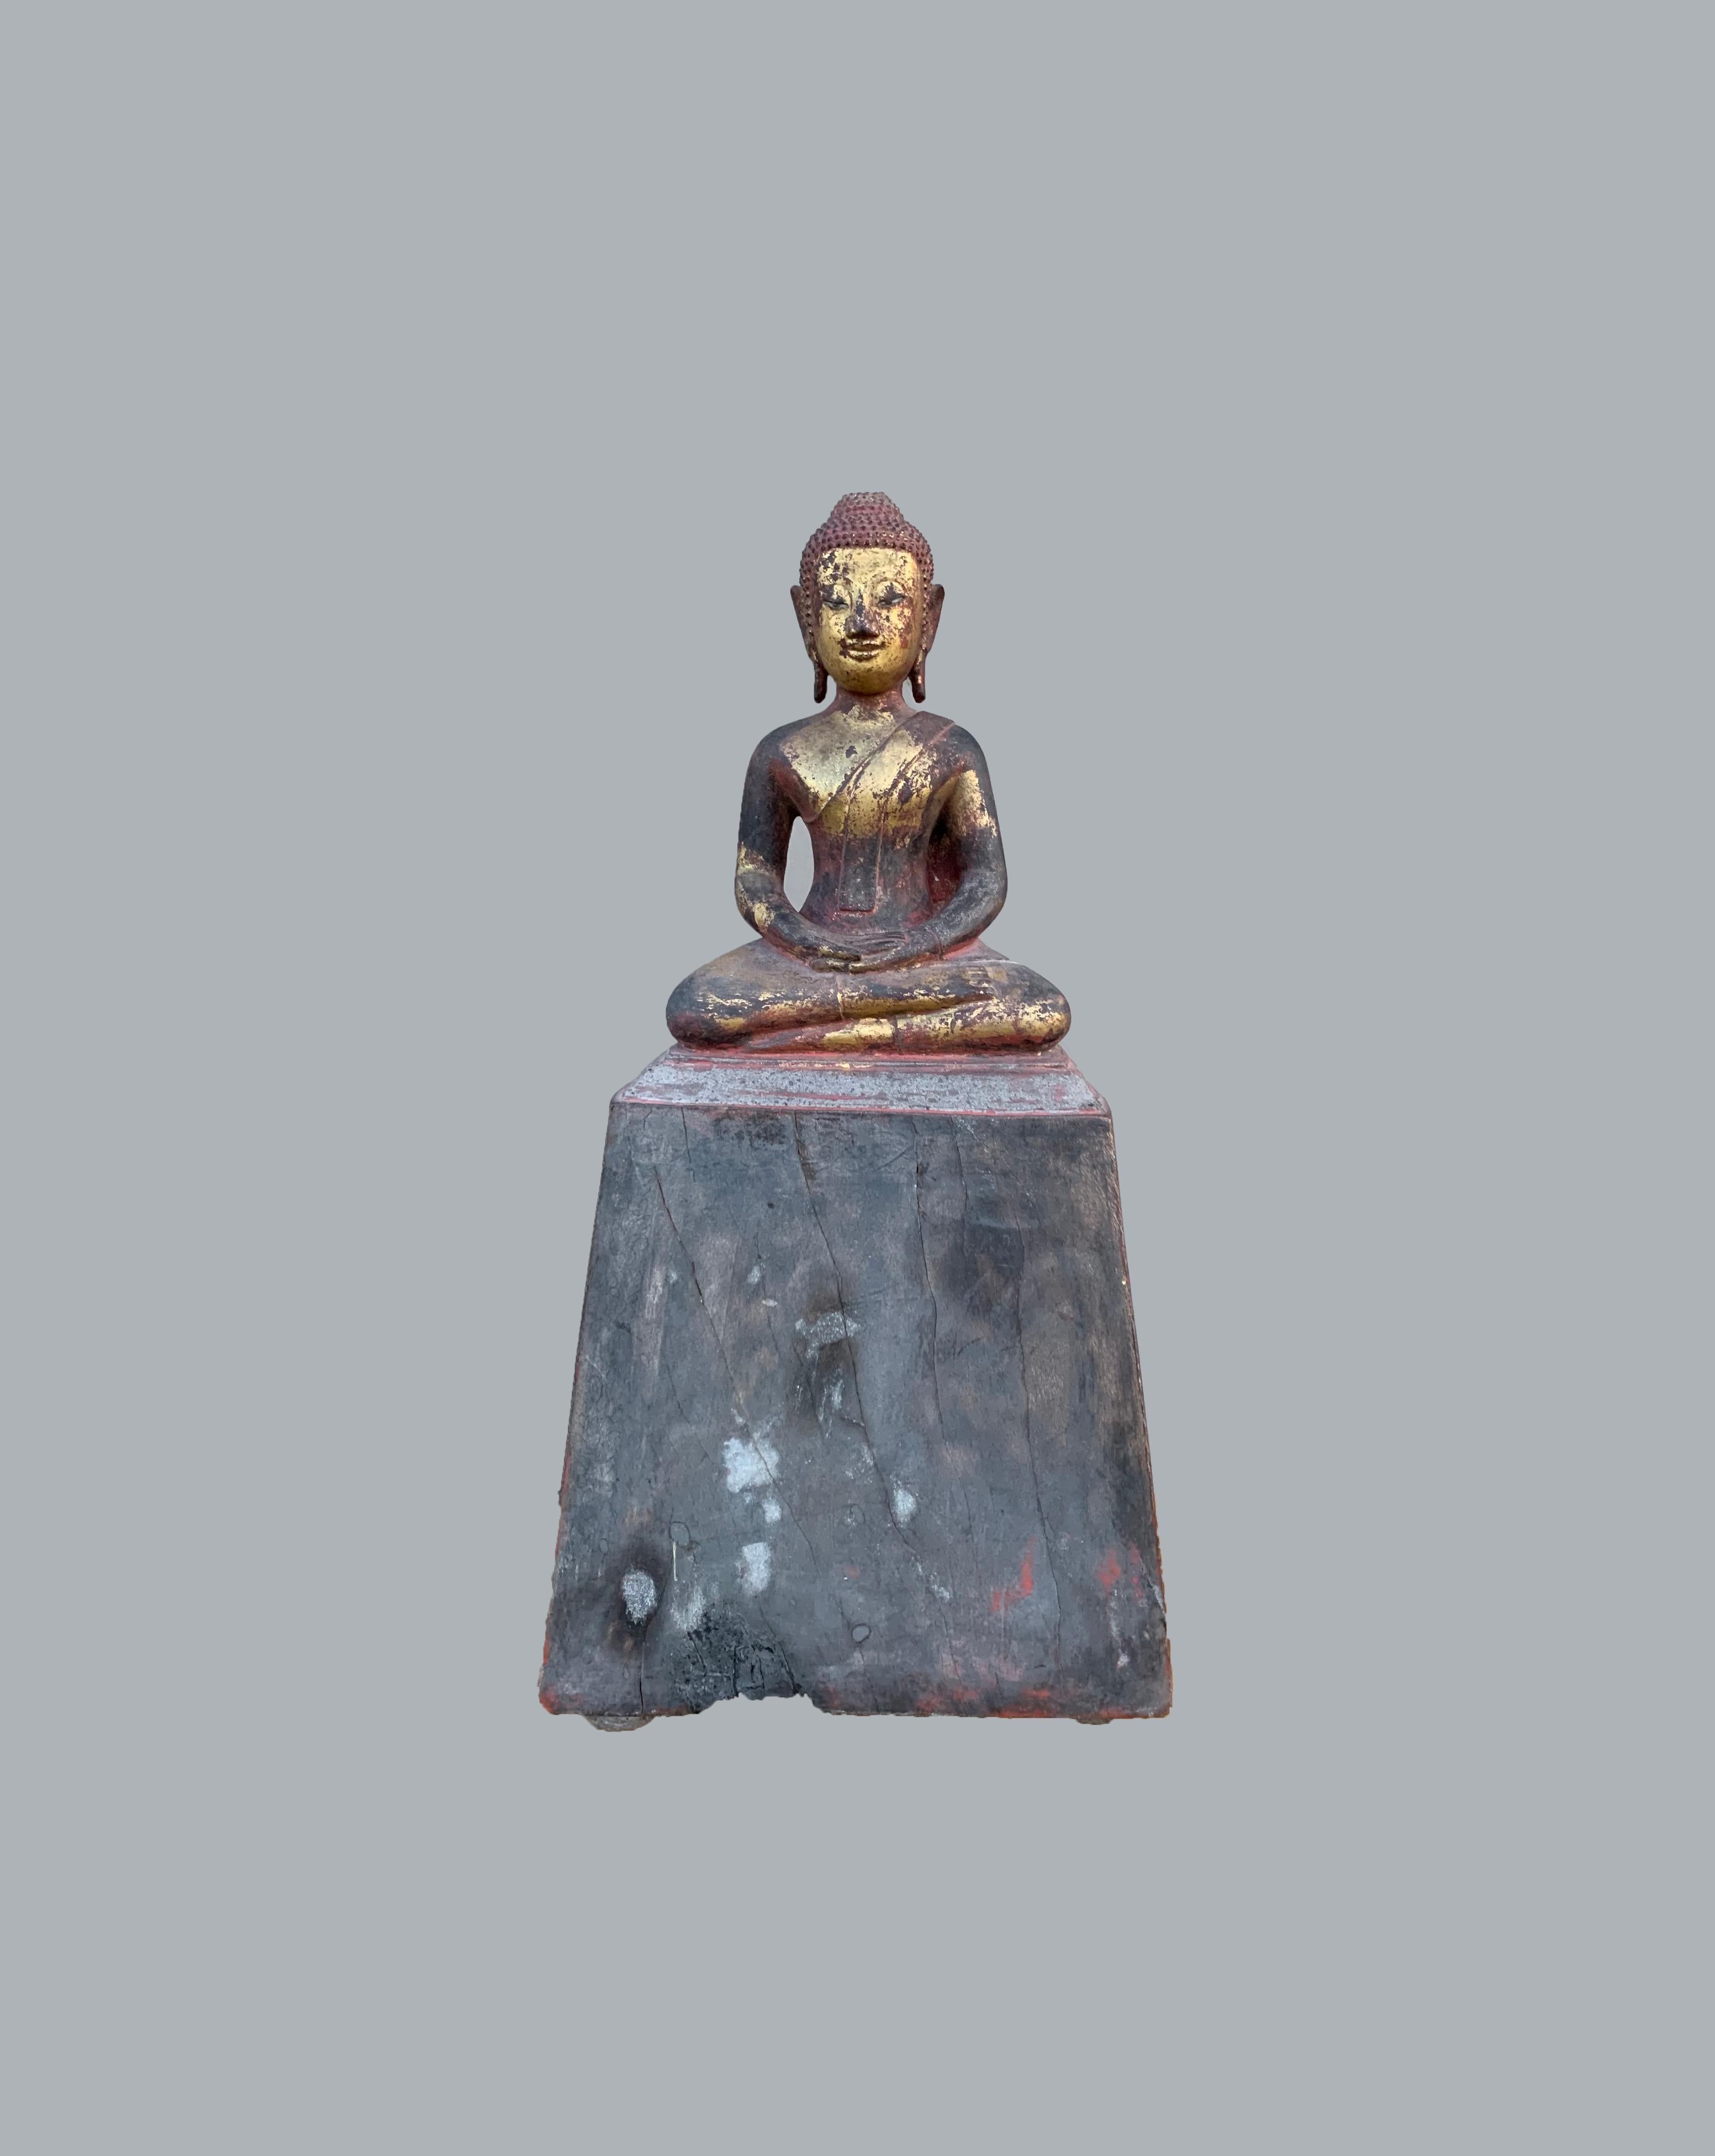 This buddha is a hand-carved from wood and once occupied a temple shrine in Northern Thailand. It has been lacquered in black and red and then gilded (covered with gold leaf). There are clear burn marks on its frontal side from having occupied a